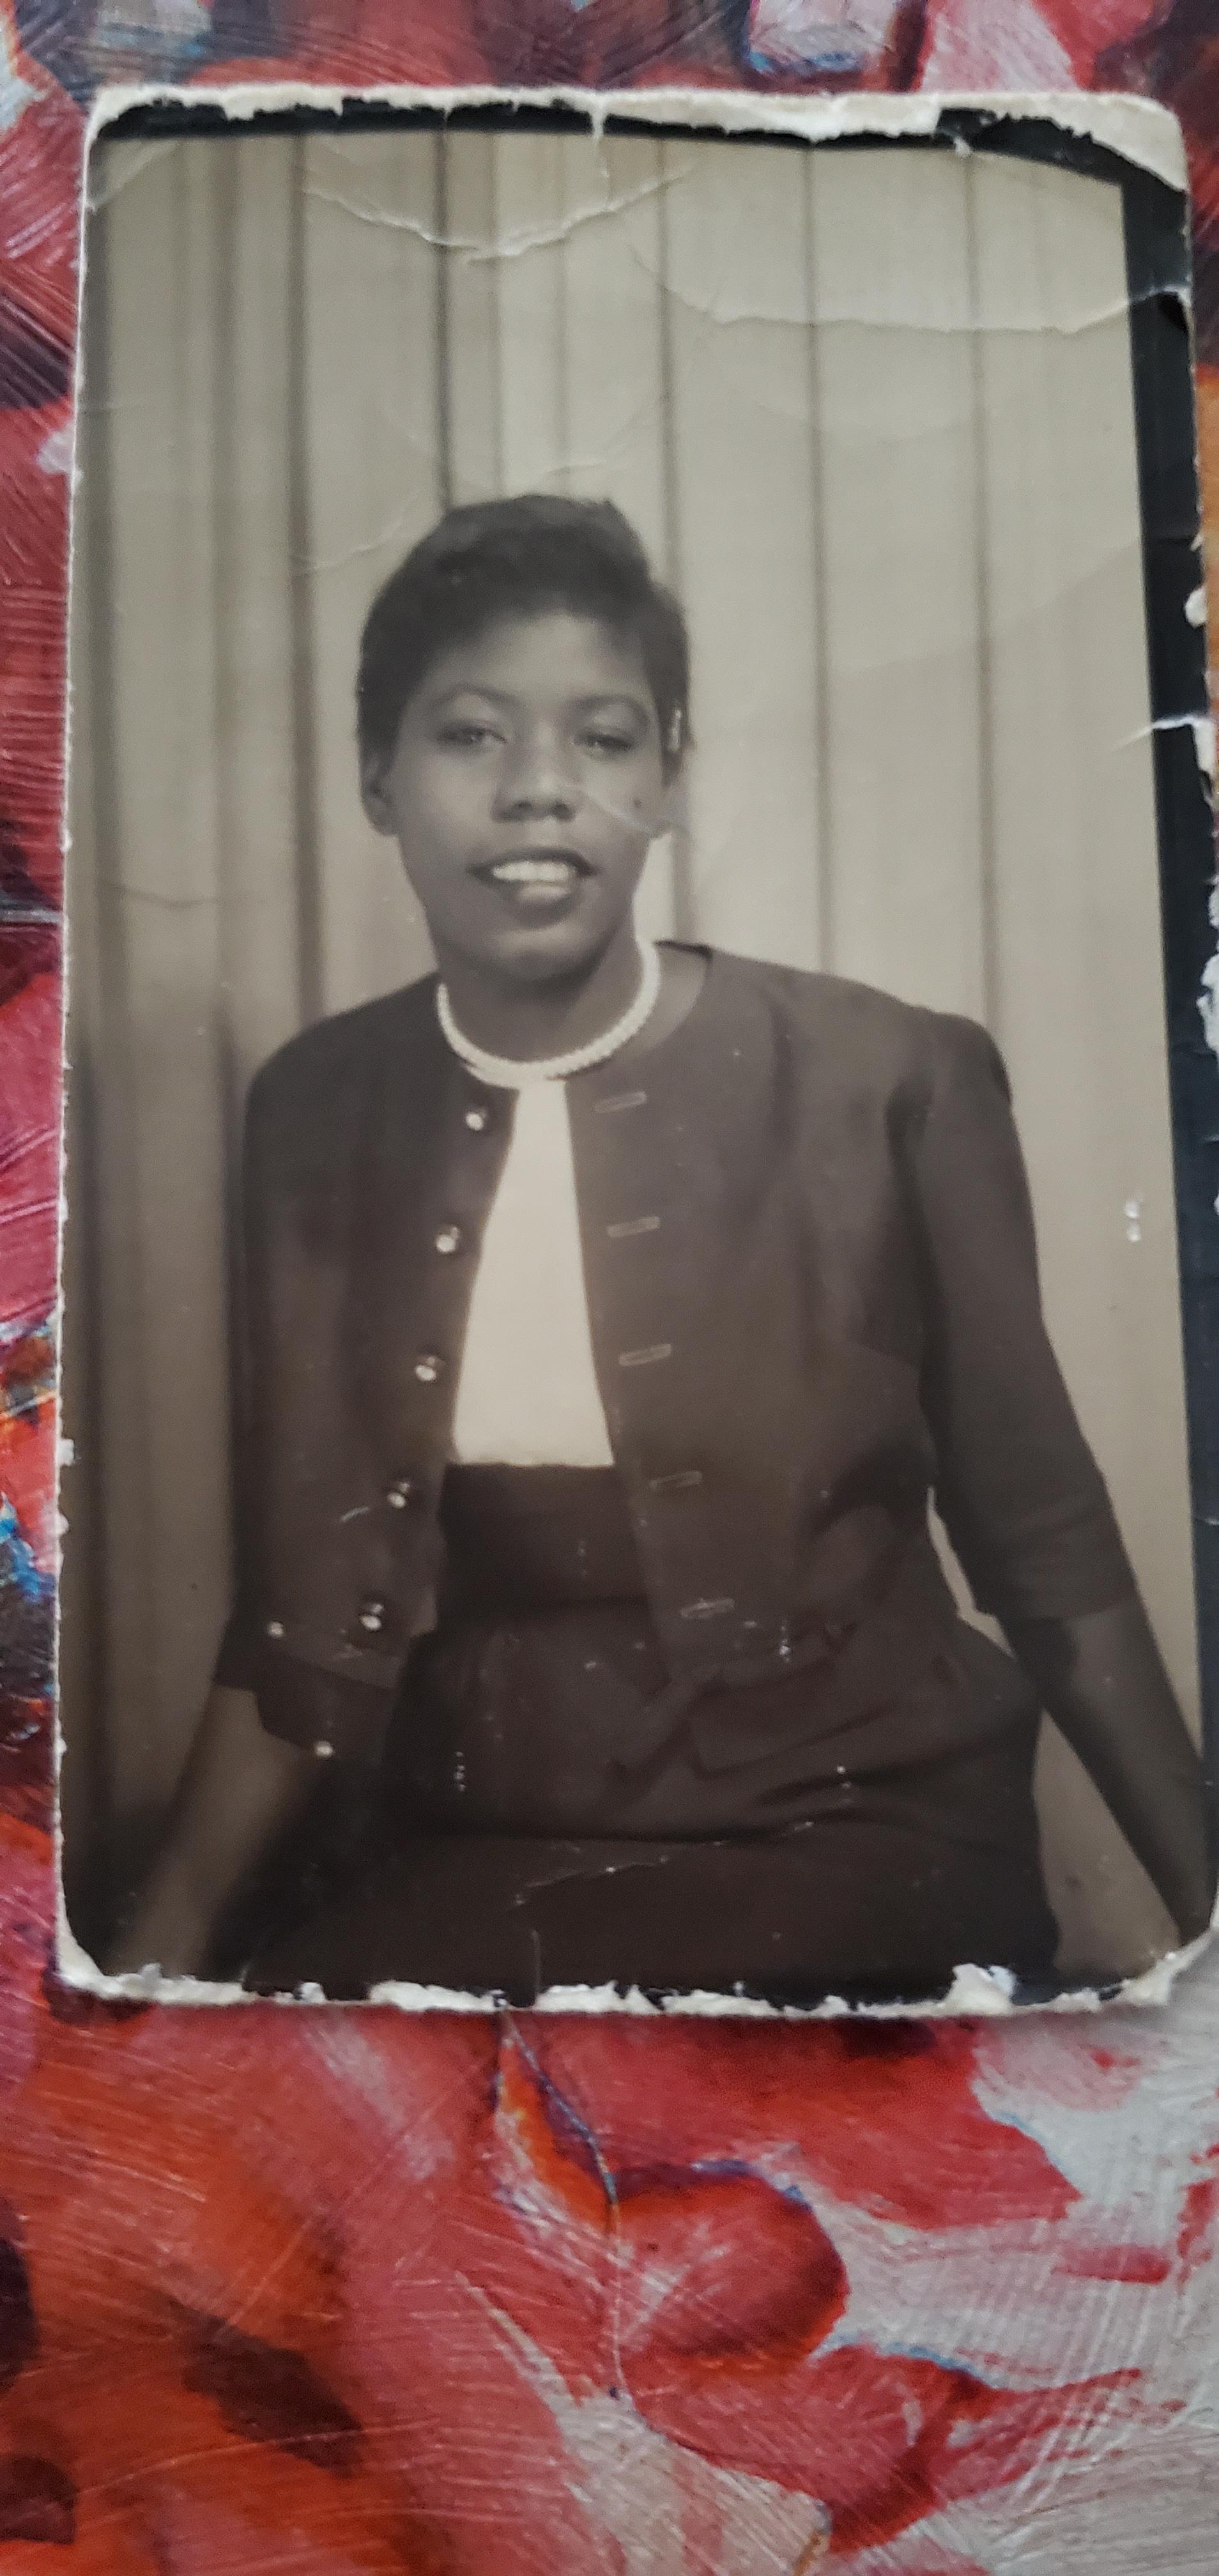 My mom Eunice Camel  passed away  March 2019